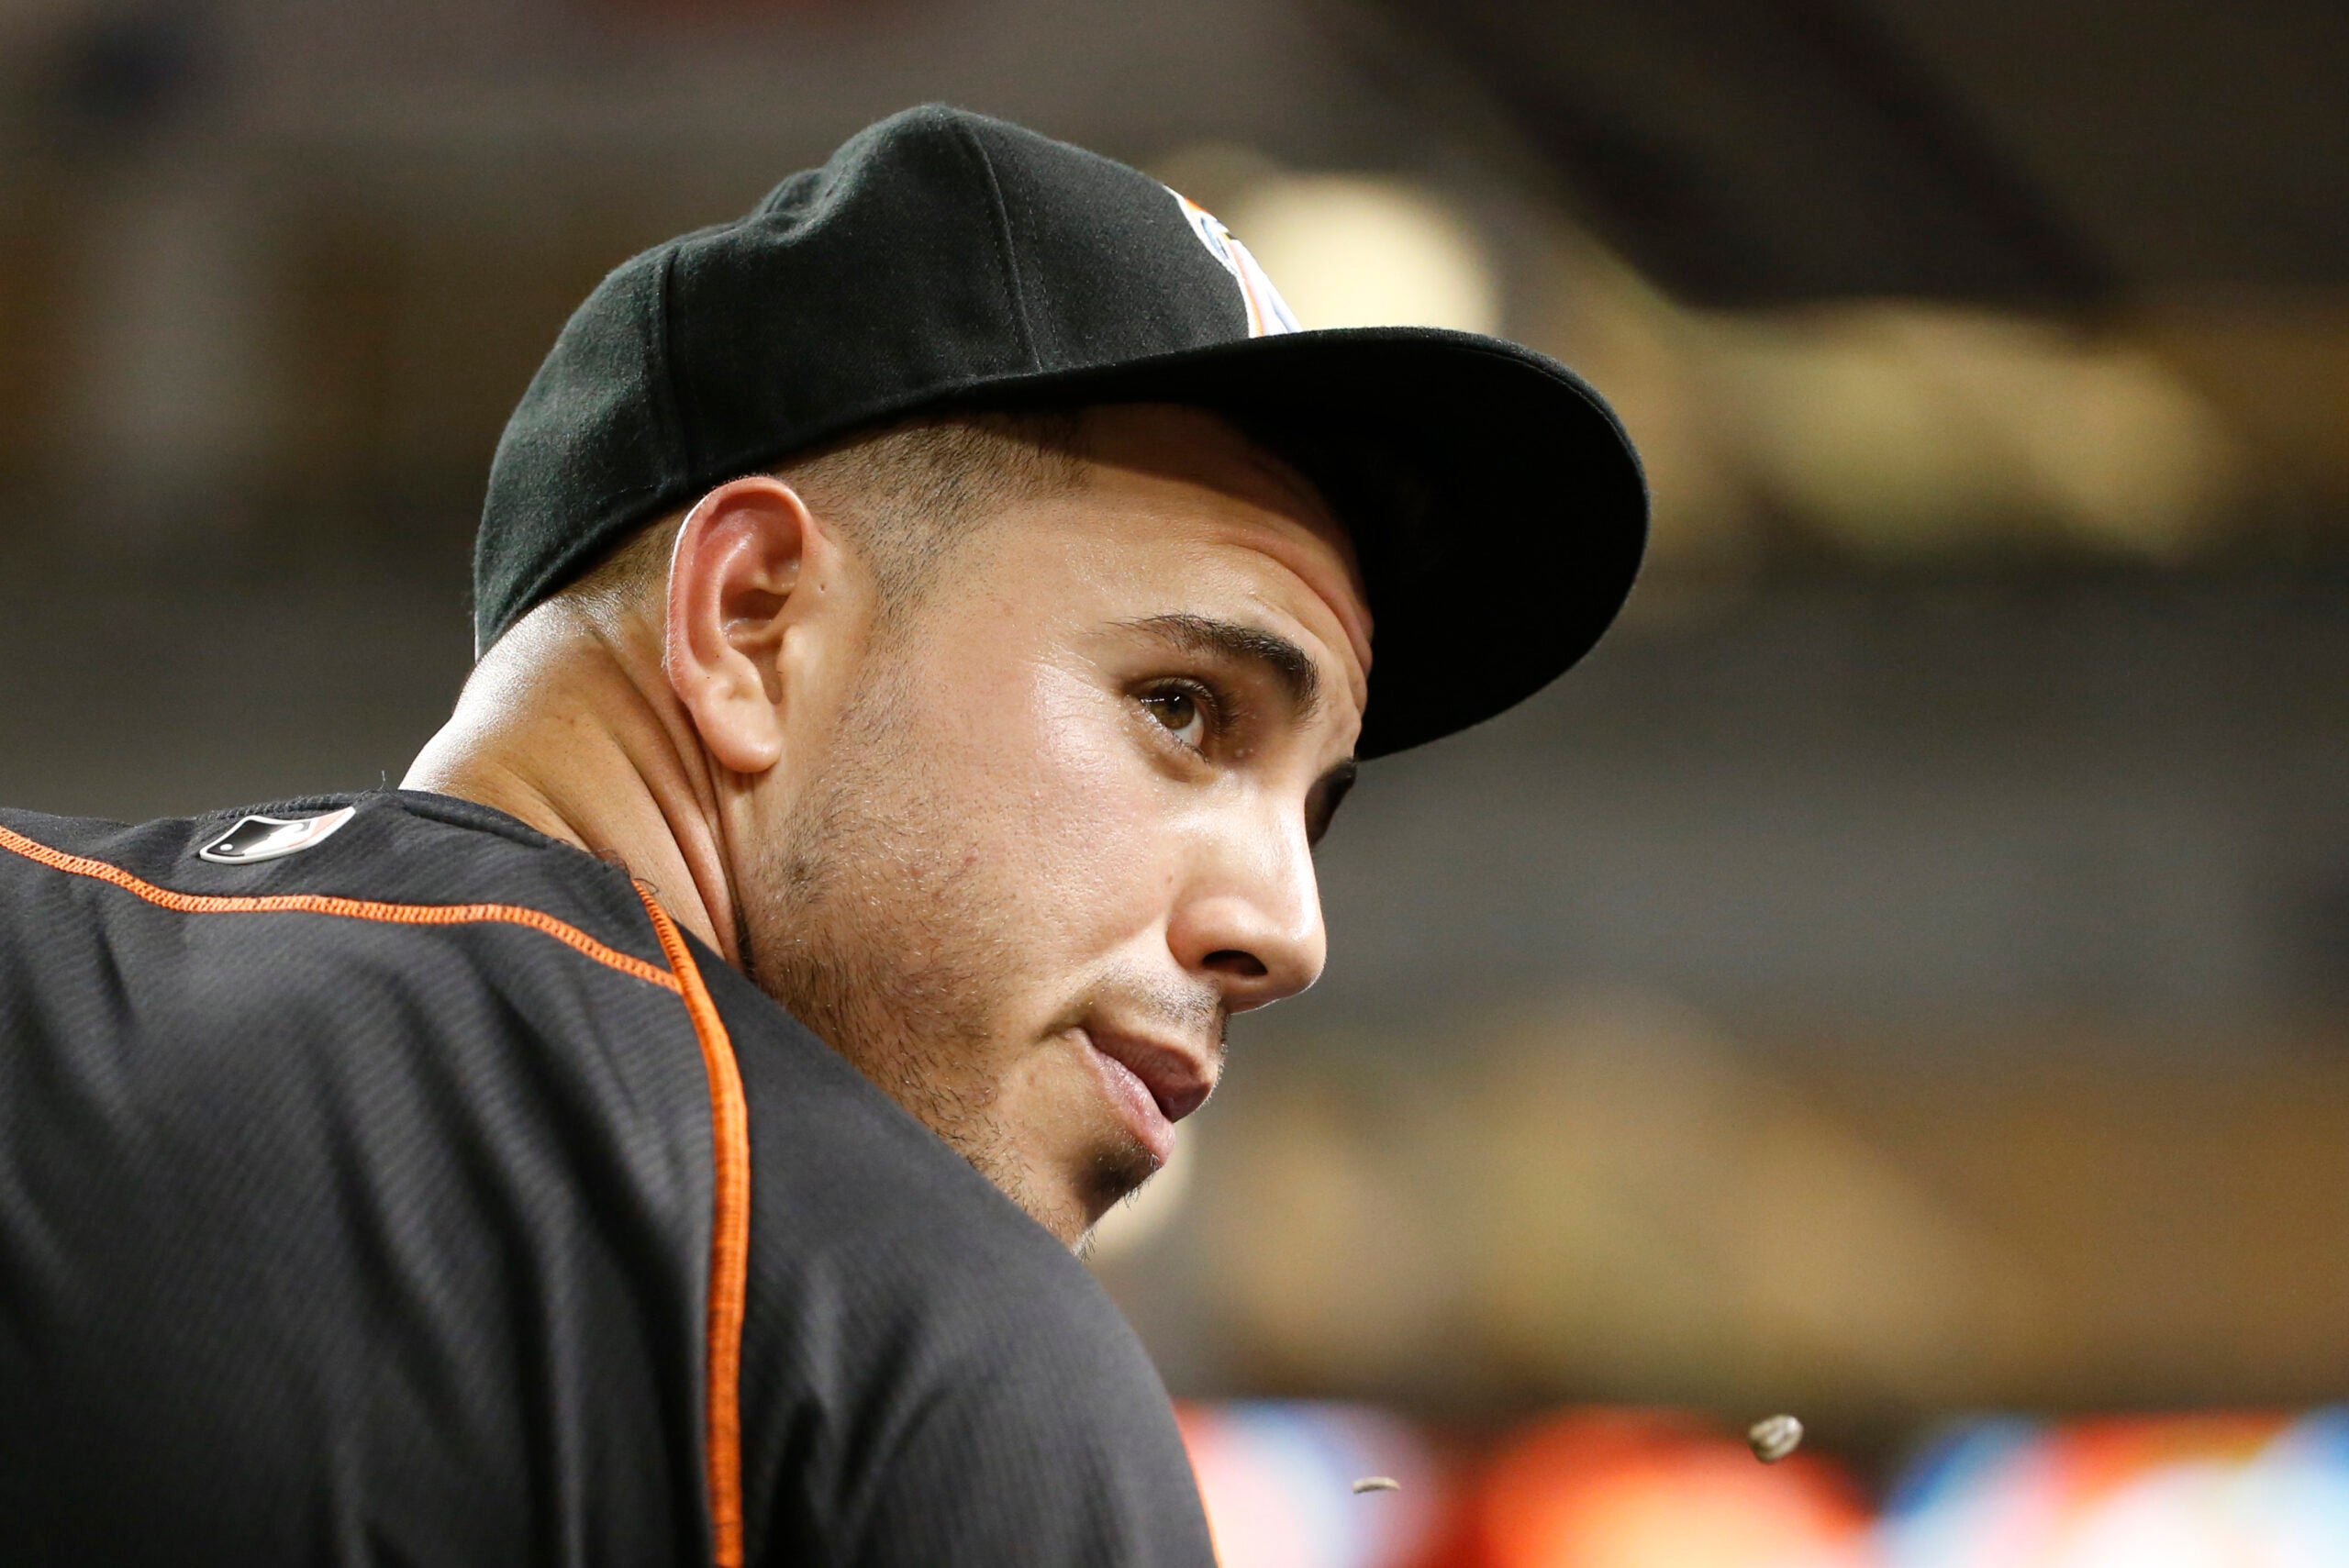 Autopsy: Marlins pitcher Jose Fernandez had cocaine, alcohol in